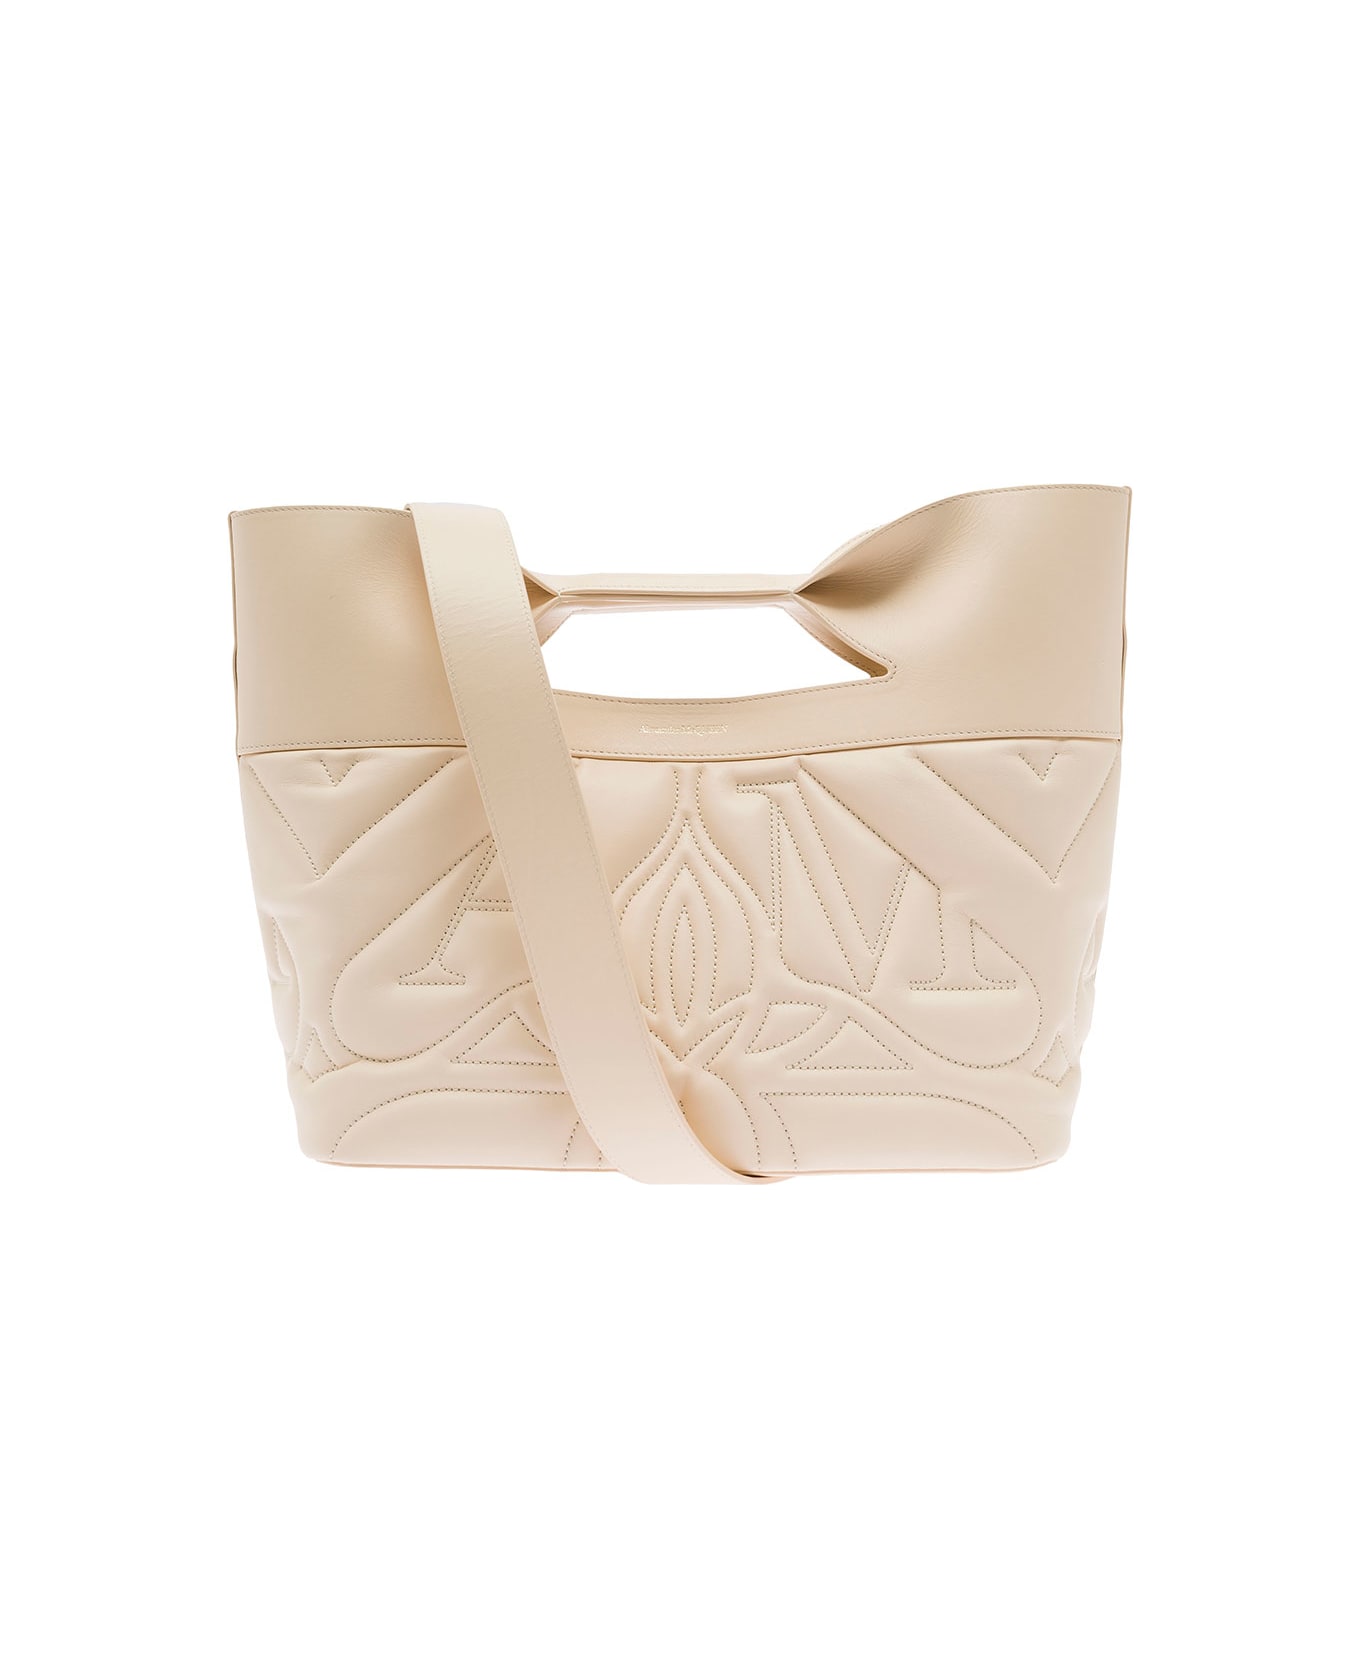 Alexander McQueen Cream White 'the Bow' Quilted Bag In Calf Leather - Beige